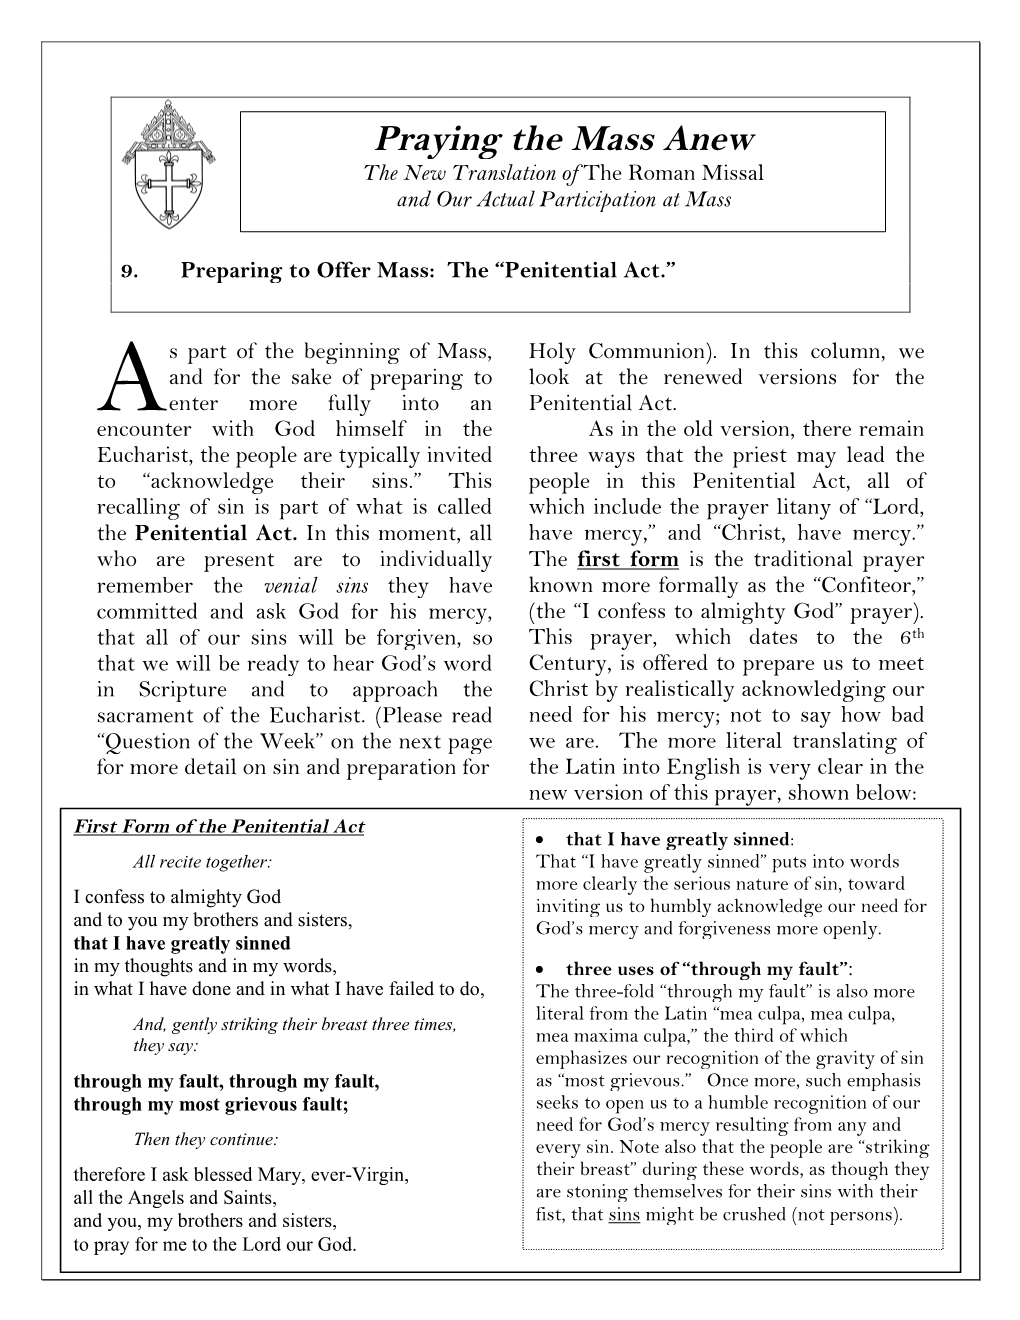 Preparing to Offer Mass: the 'Penitential Act